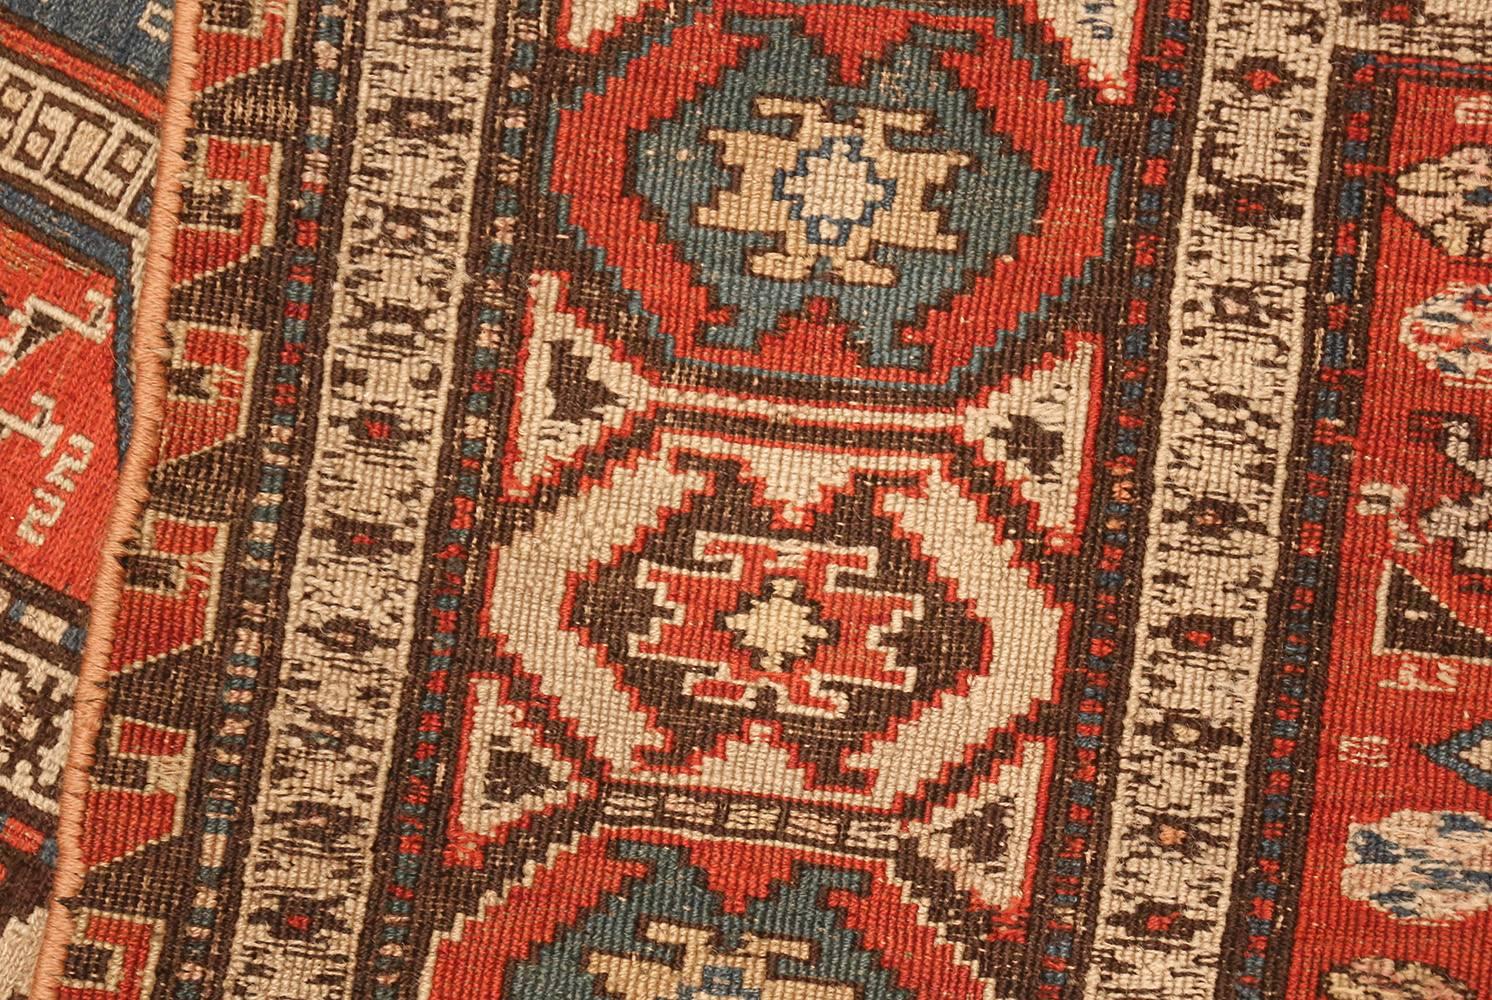 Beautiful Small Antique Tribal Soumak Caucasian Rug, Country of Origin / Rug Type: Caucasian Rug, Circa Date: 1900 – Size: 4 ft 4 in x 6 ft 5 in (1.32 m x 1.96 m)

Well balanced and vibrant, this antique Soumak rug makes a bold statement in any